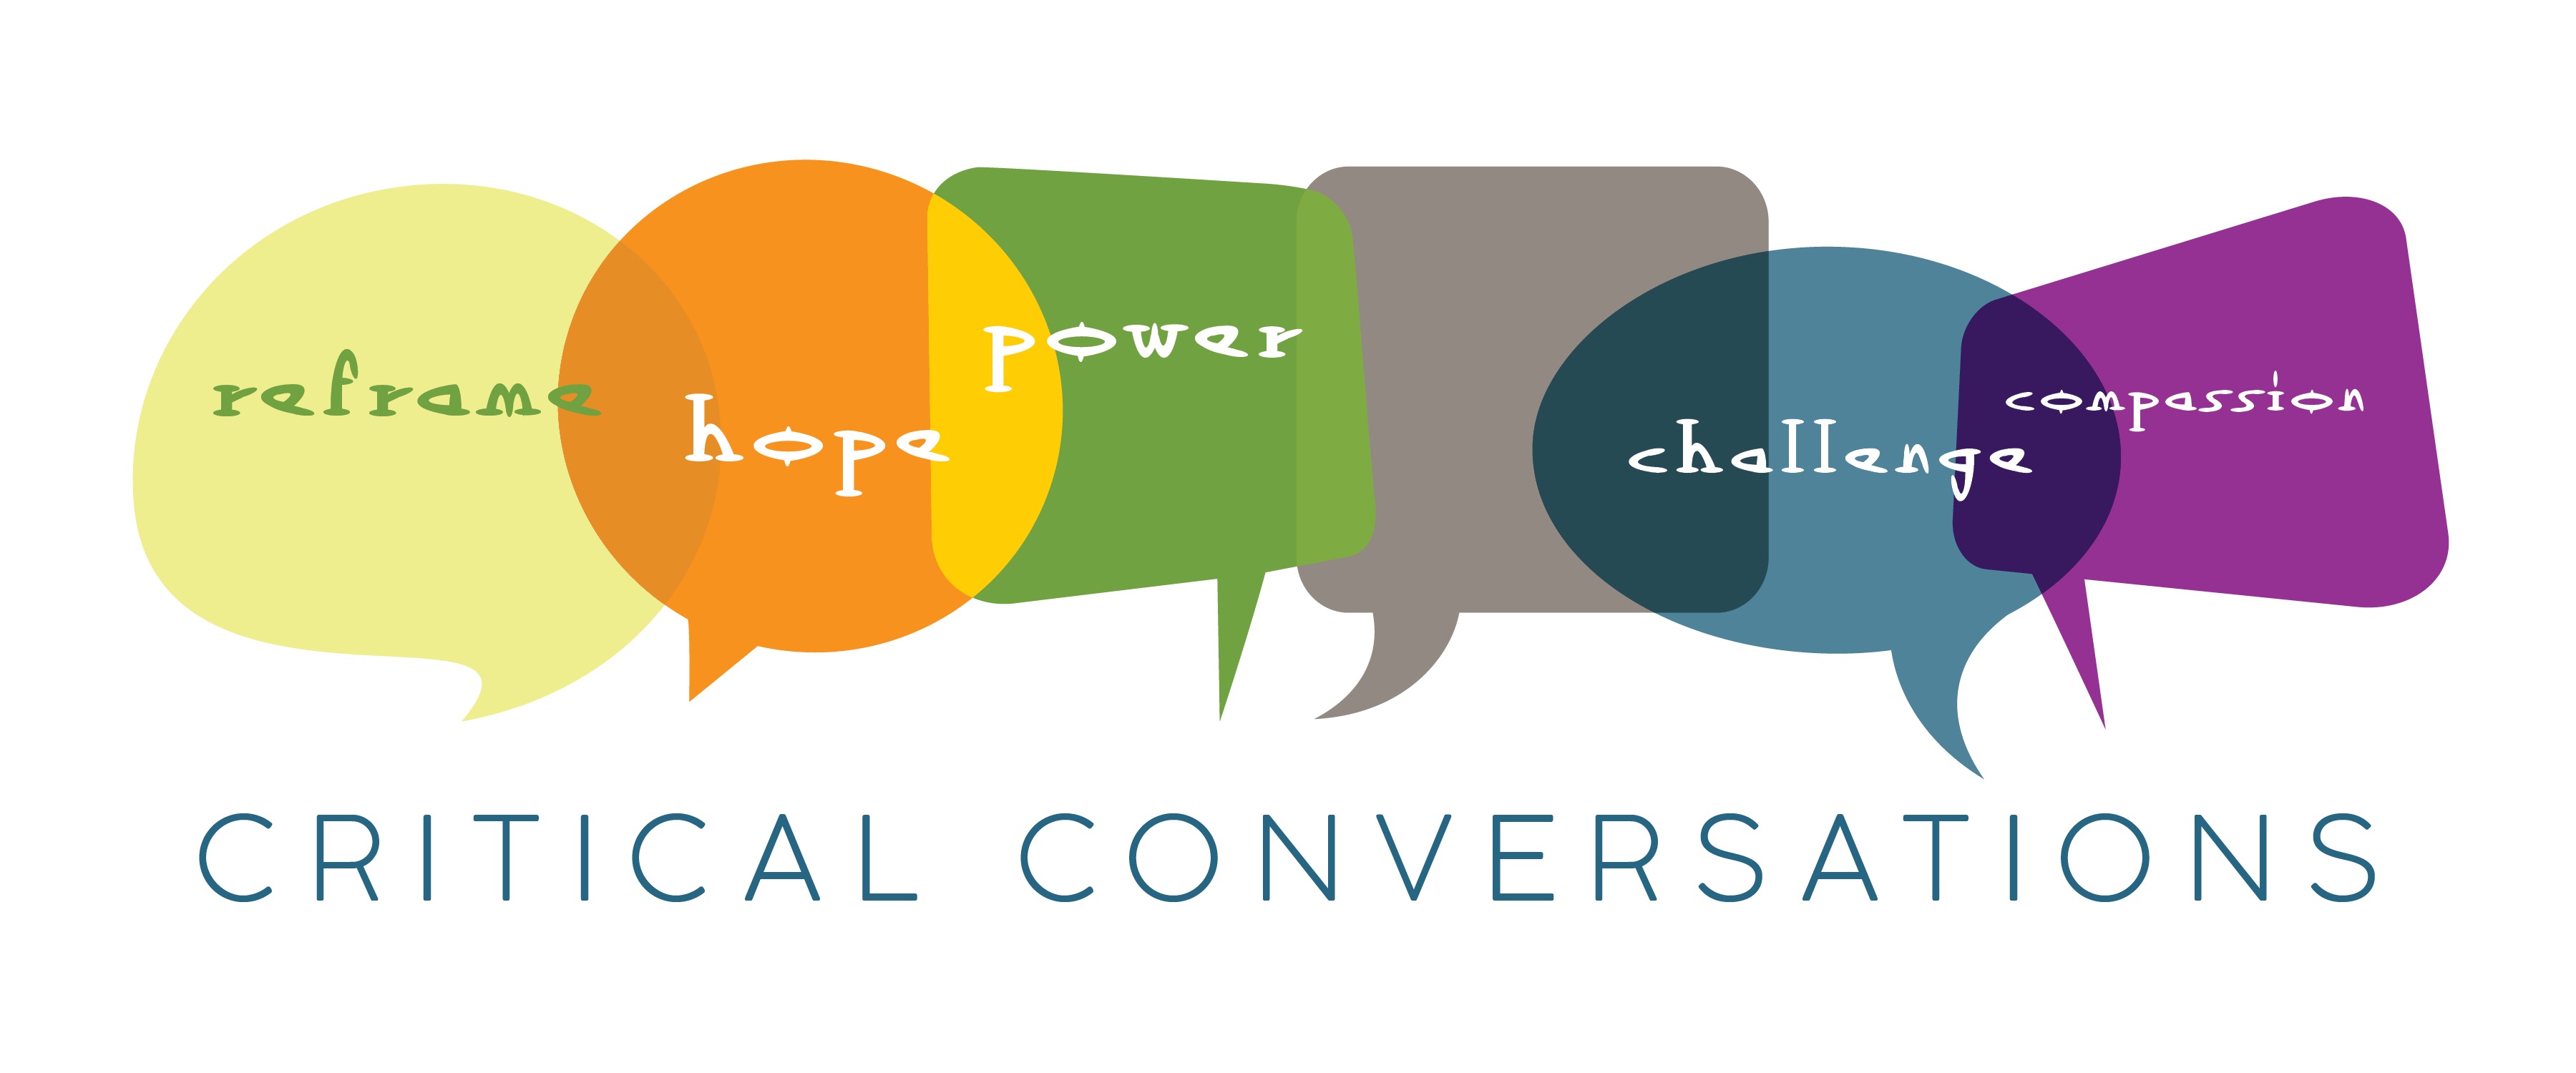 Critical Conversations Training: Deepening Our Ability to Facilitate Difficult Conversations Inside and Beyond the Classroom